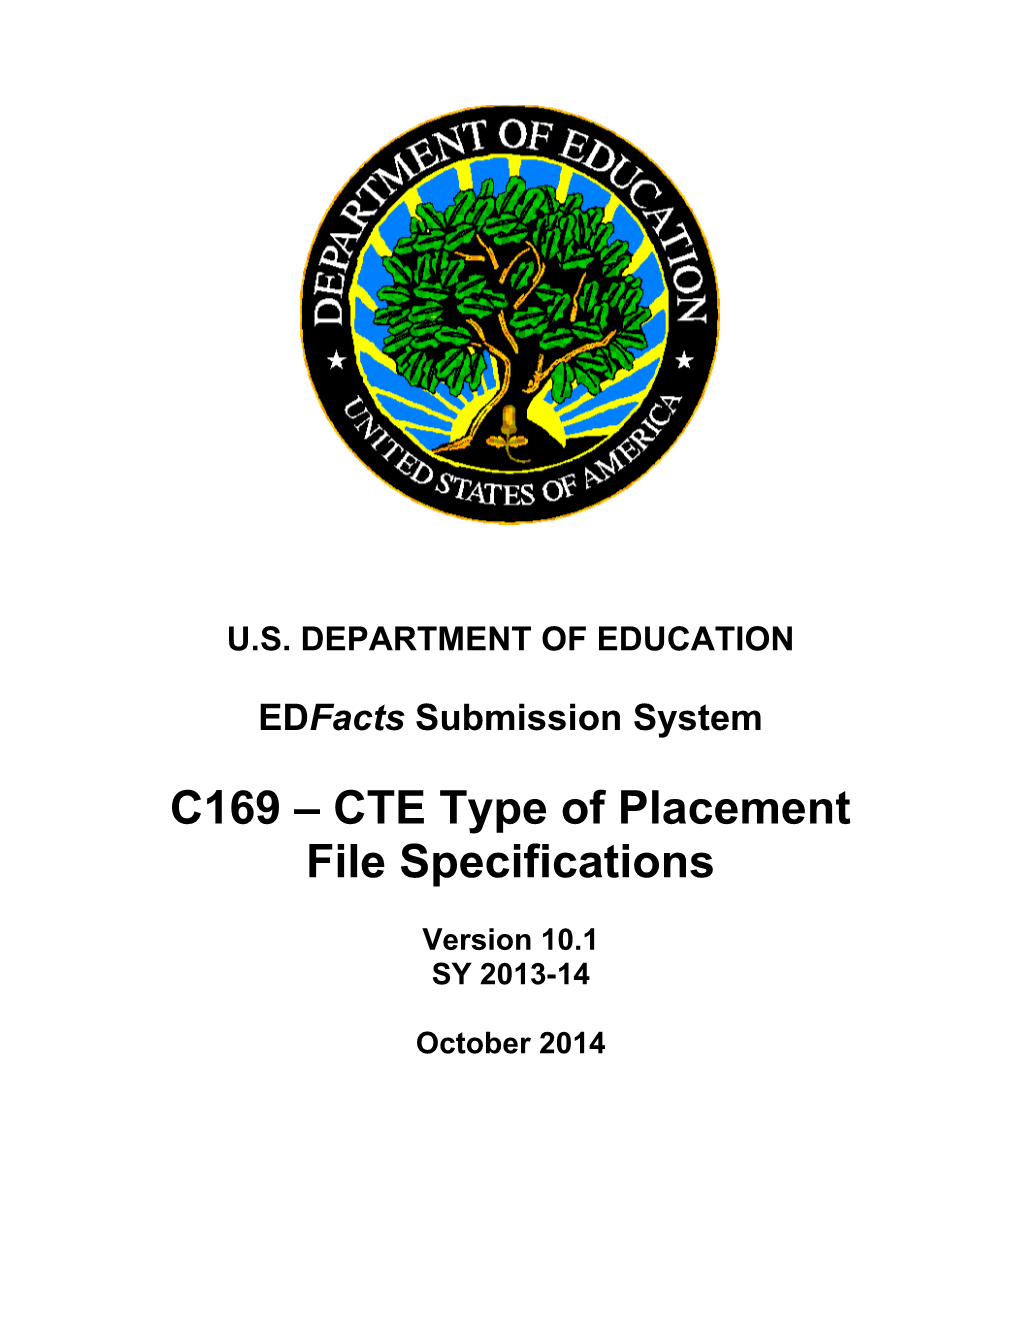 CTE Type of Placement File Specification